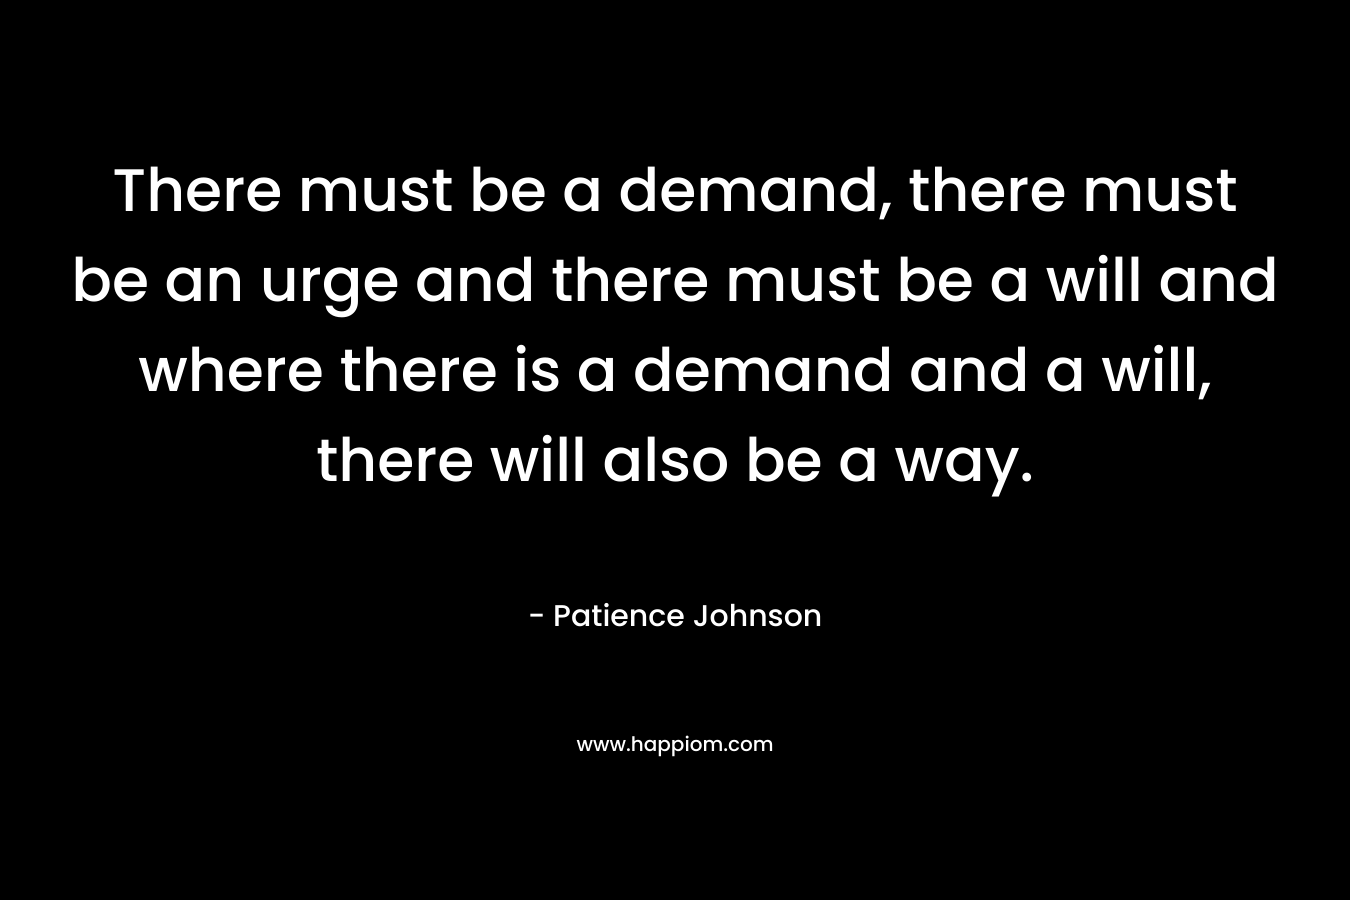 There must be a demand, there must be an urge and there must be a will and where there is a demand and a will, there will also be a way.